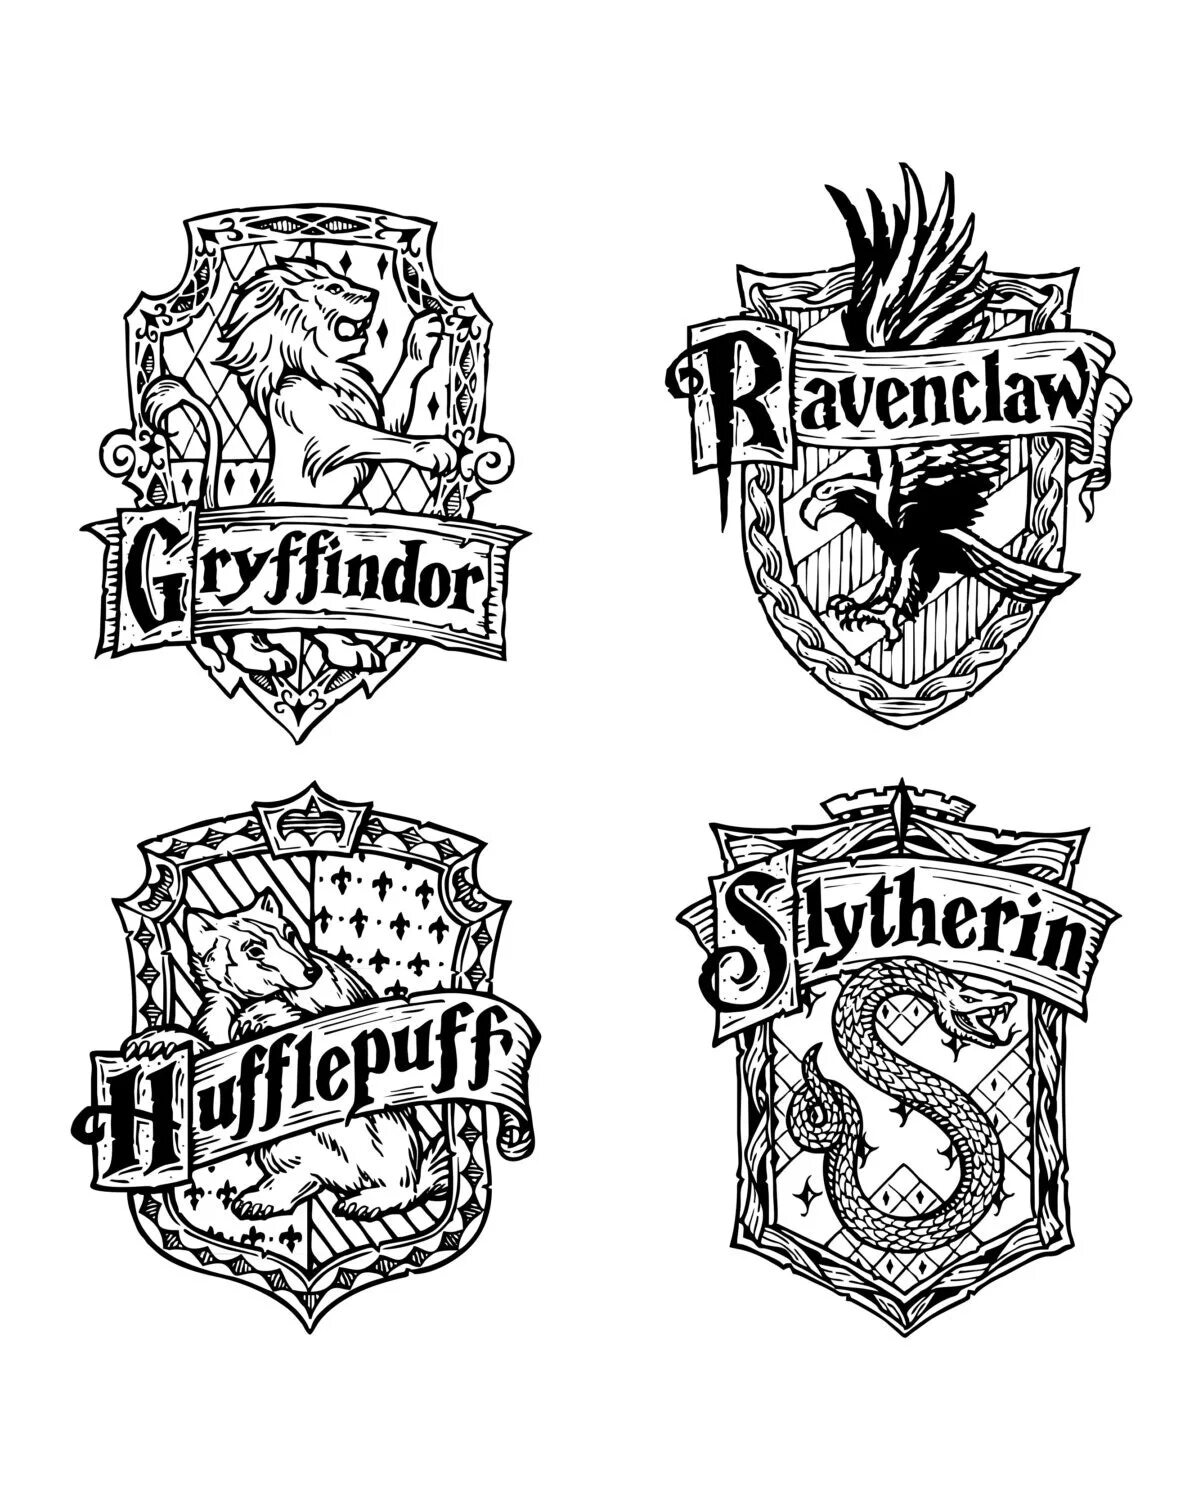 Ravenclaw coat of arms colorful coloring page